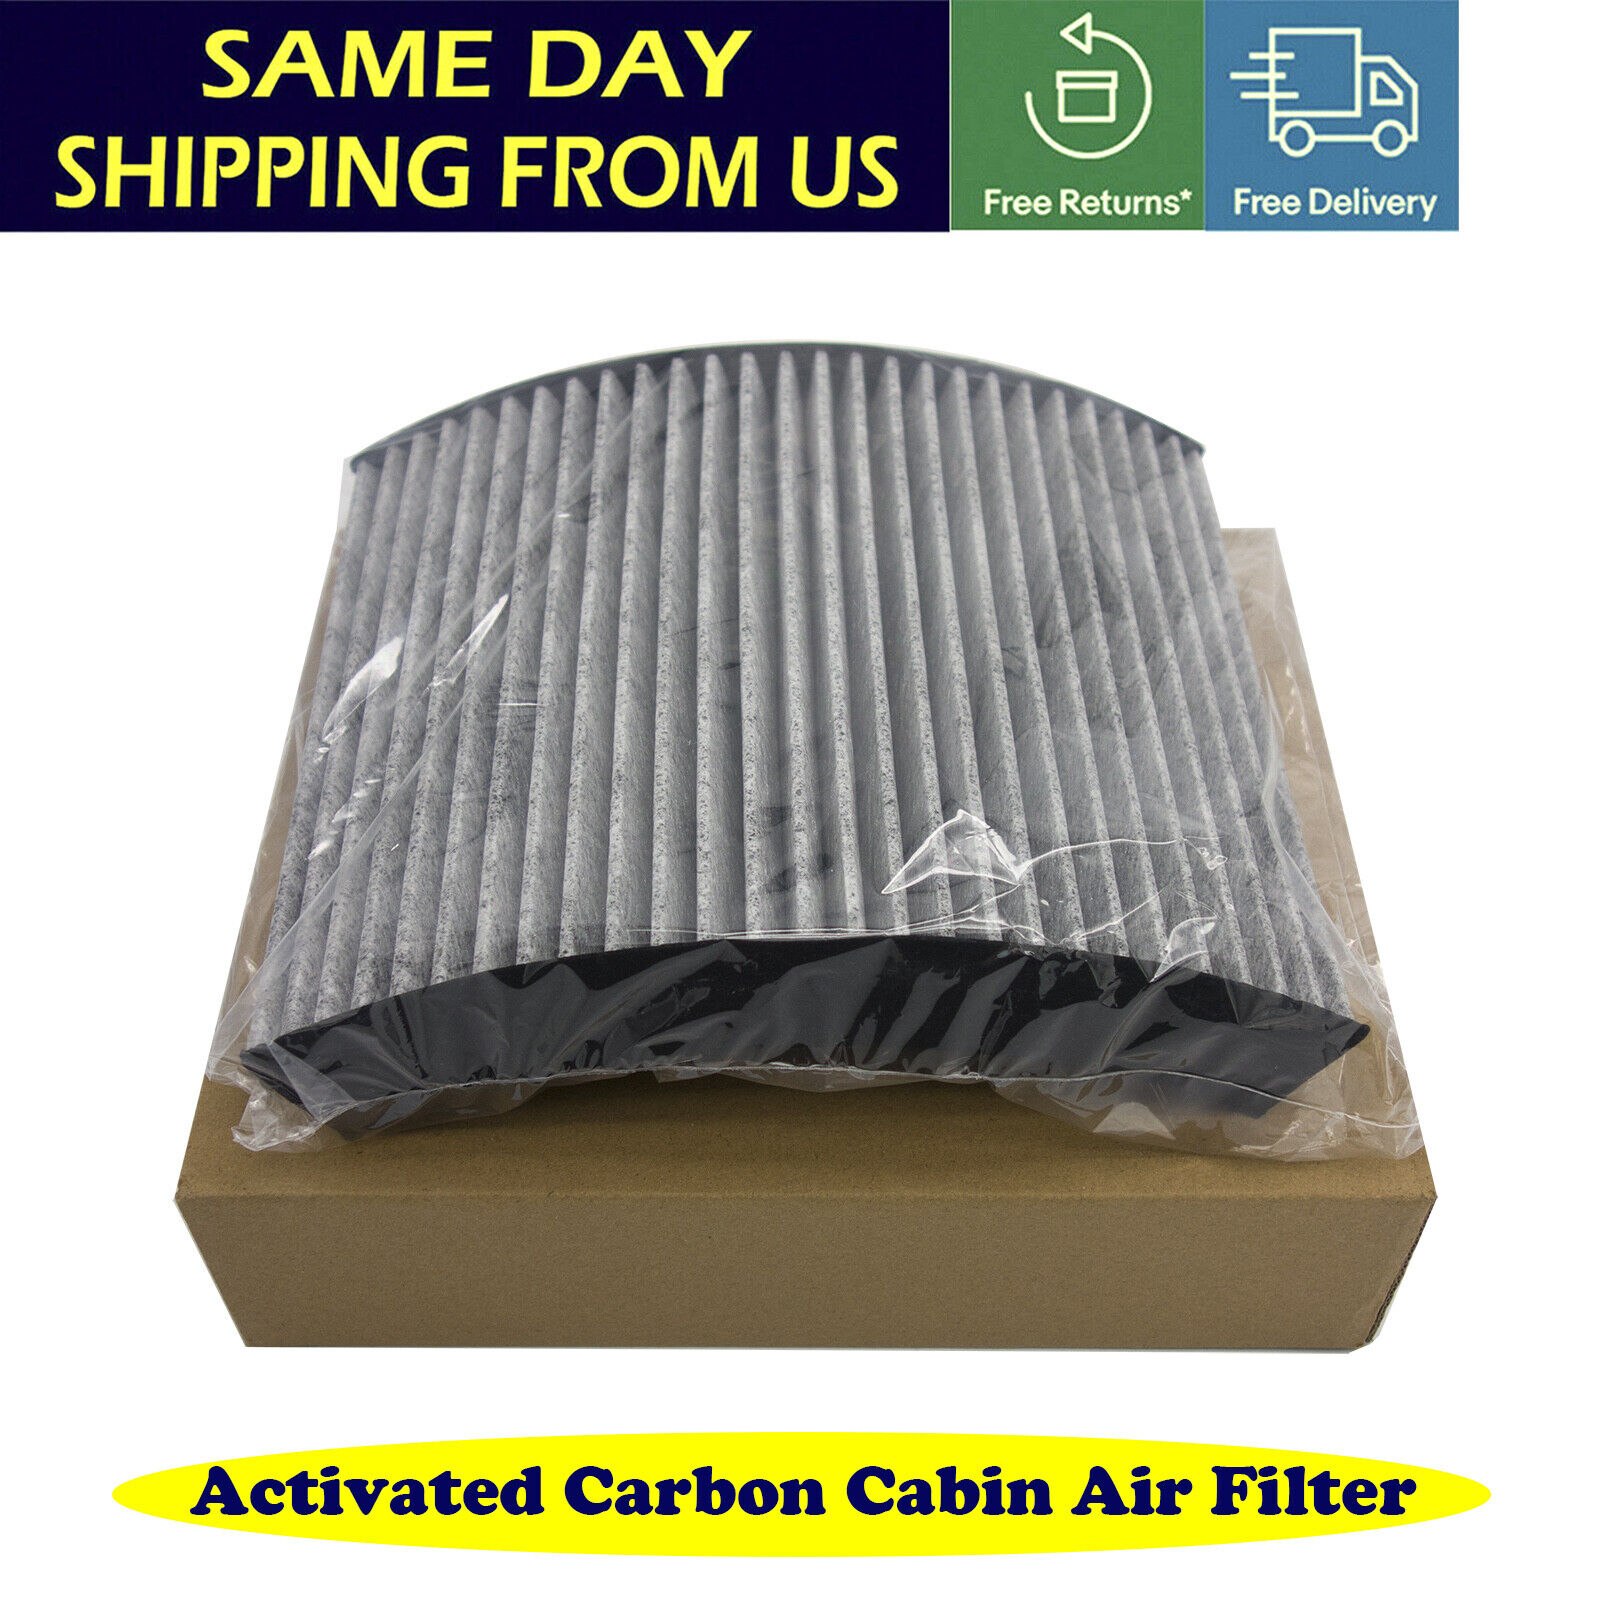 Activated Carbon Cabin Air Filter 64119237555 For BMW 1 2 3 Series F30 F31 M3 M4